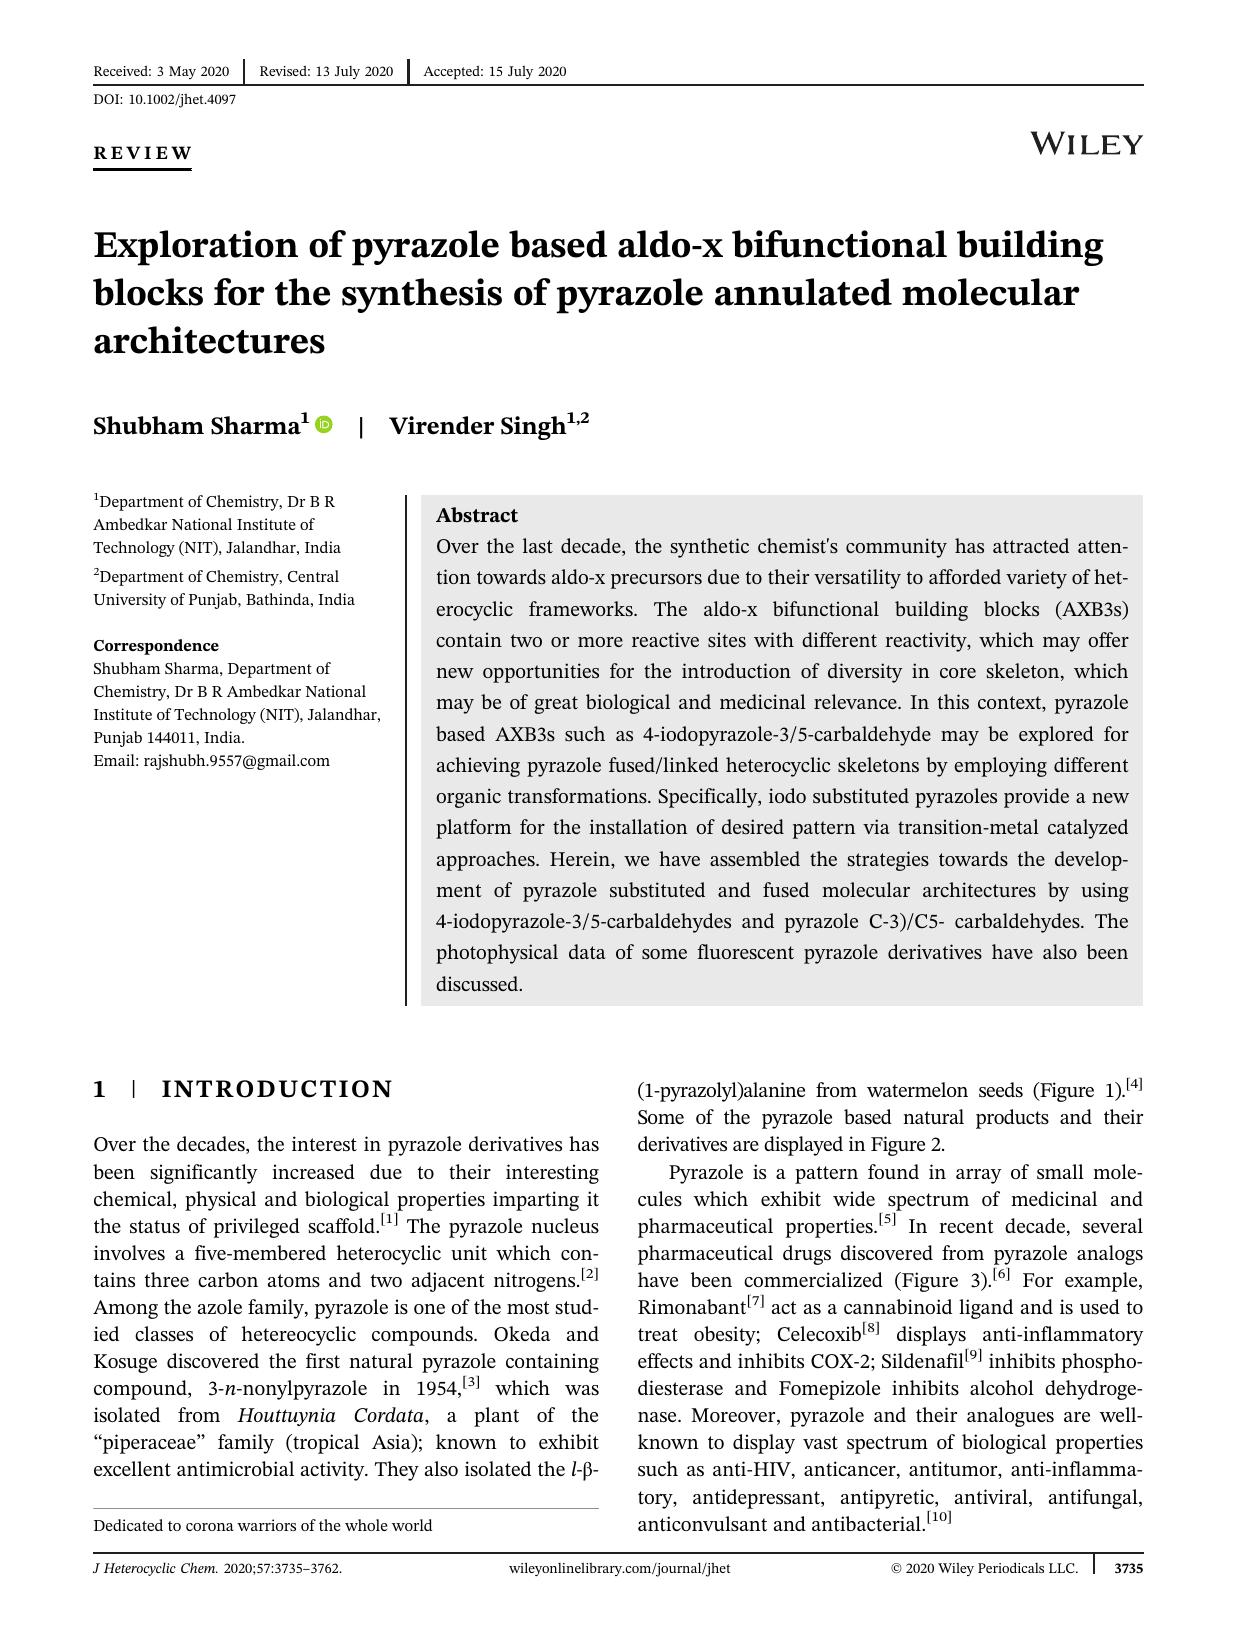 Exploration of Pyrazole Based Aldo-X Bifunctional Building Blocks for the Synthesis of Pyrazole Annulated Molecular Architectures by Unknown